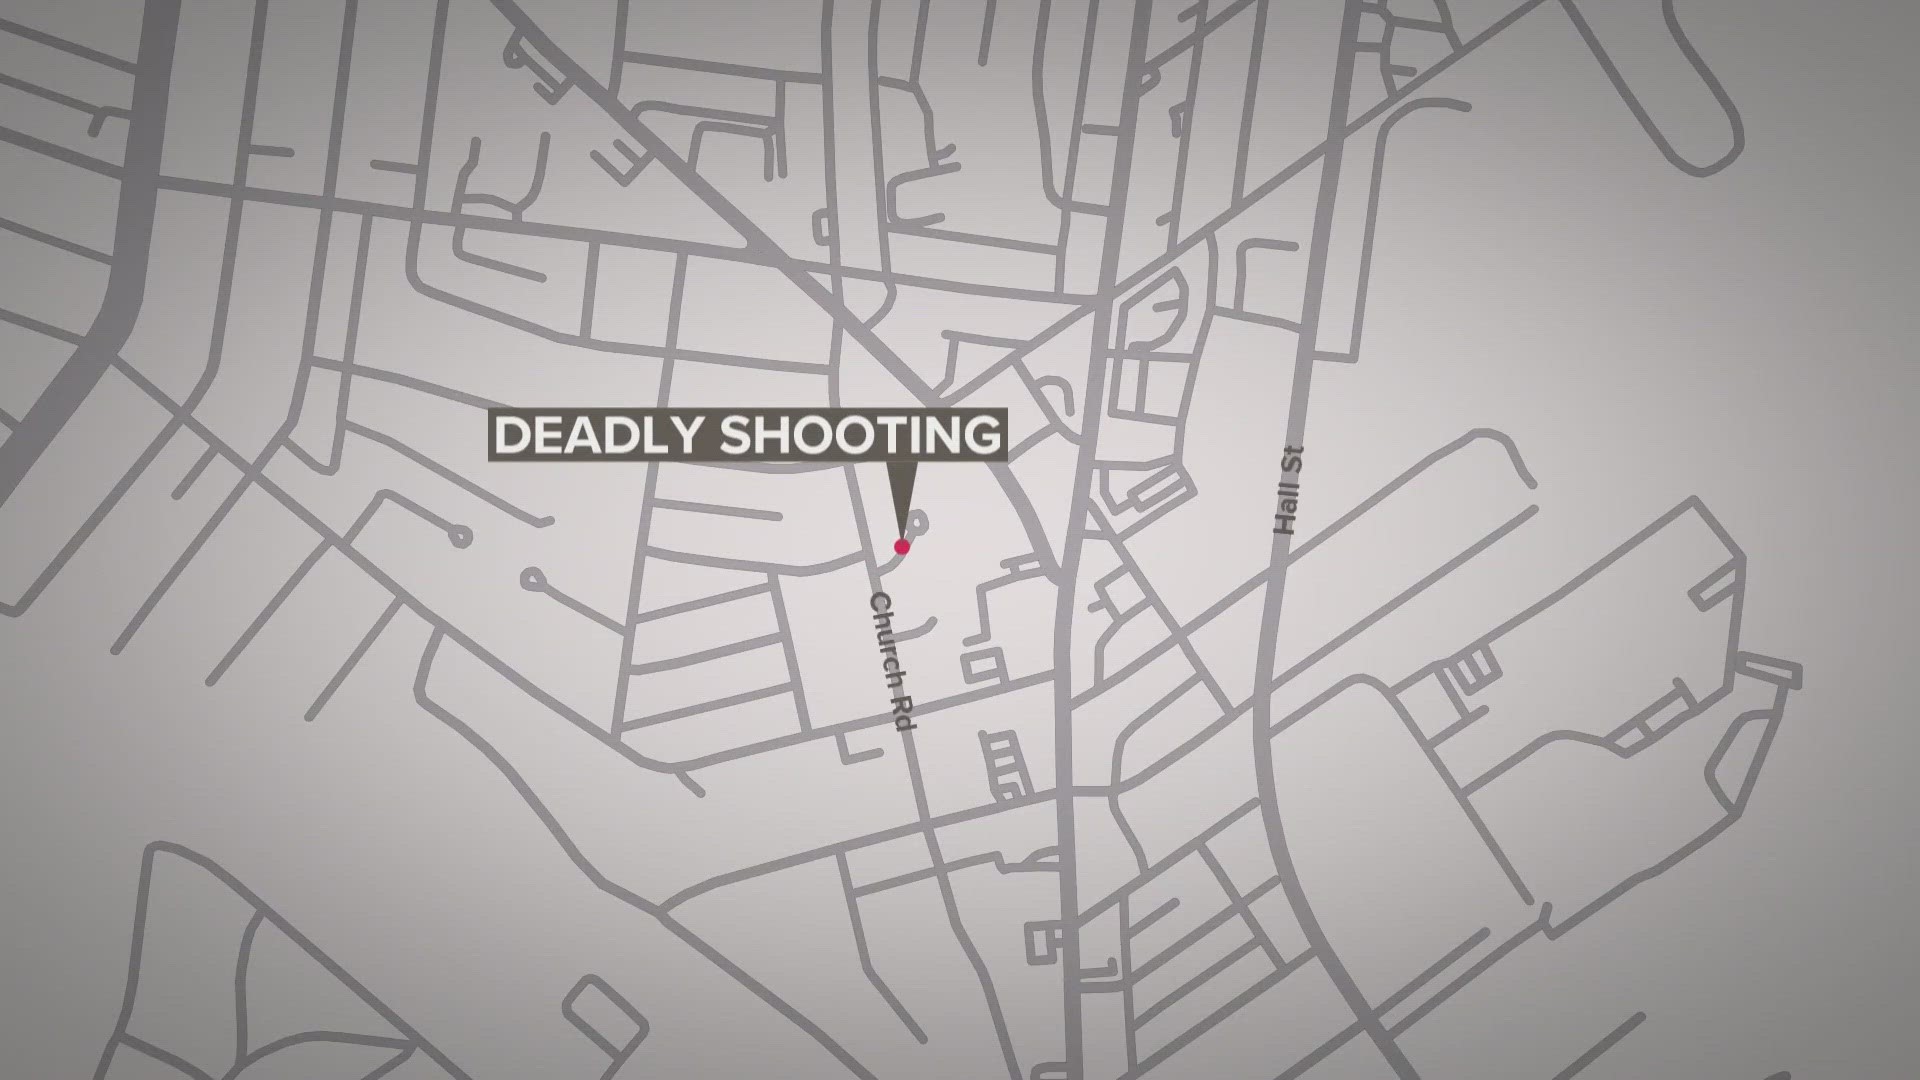 A man was fatally shot Saturday night in north St. Louis. It happened at about 11:40 p.m. on Dickman Park Road.